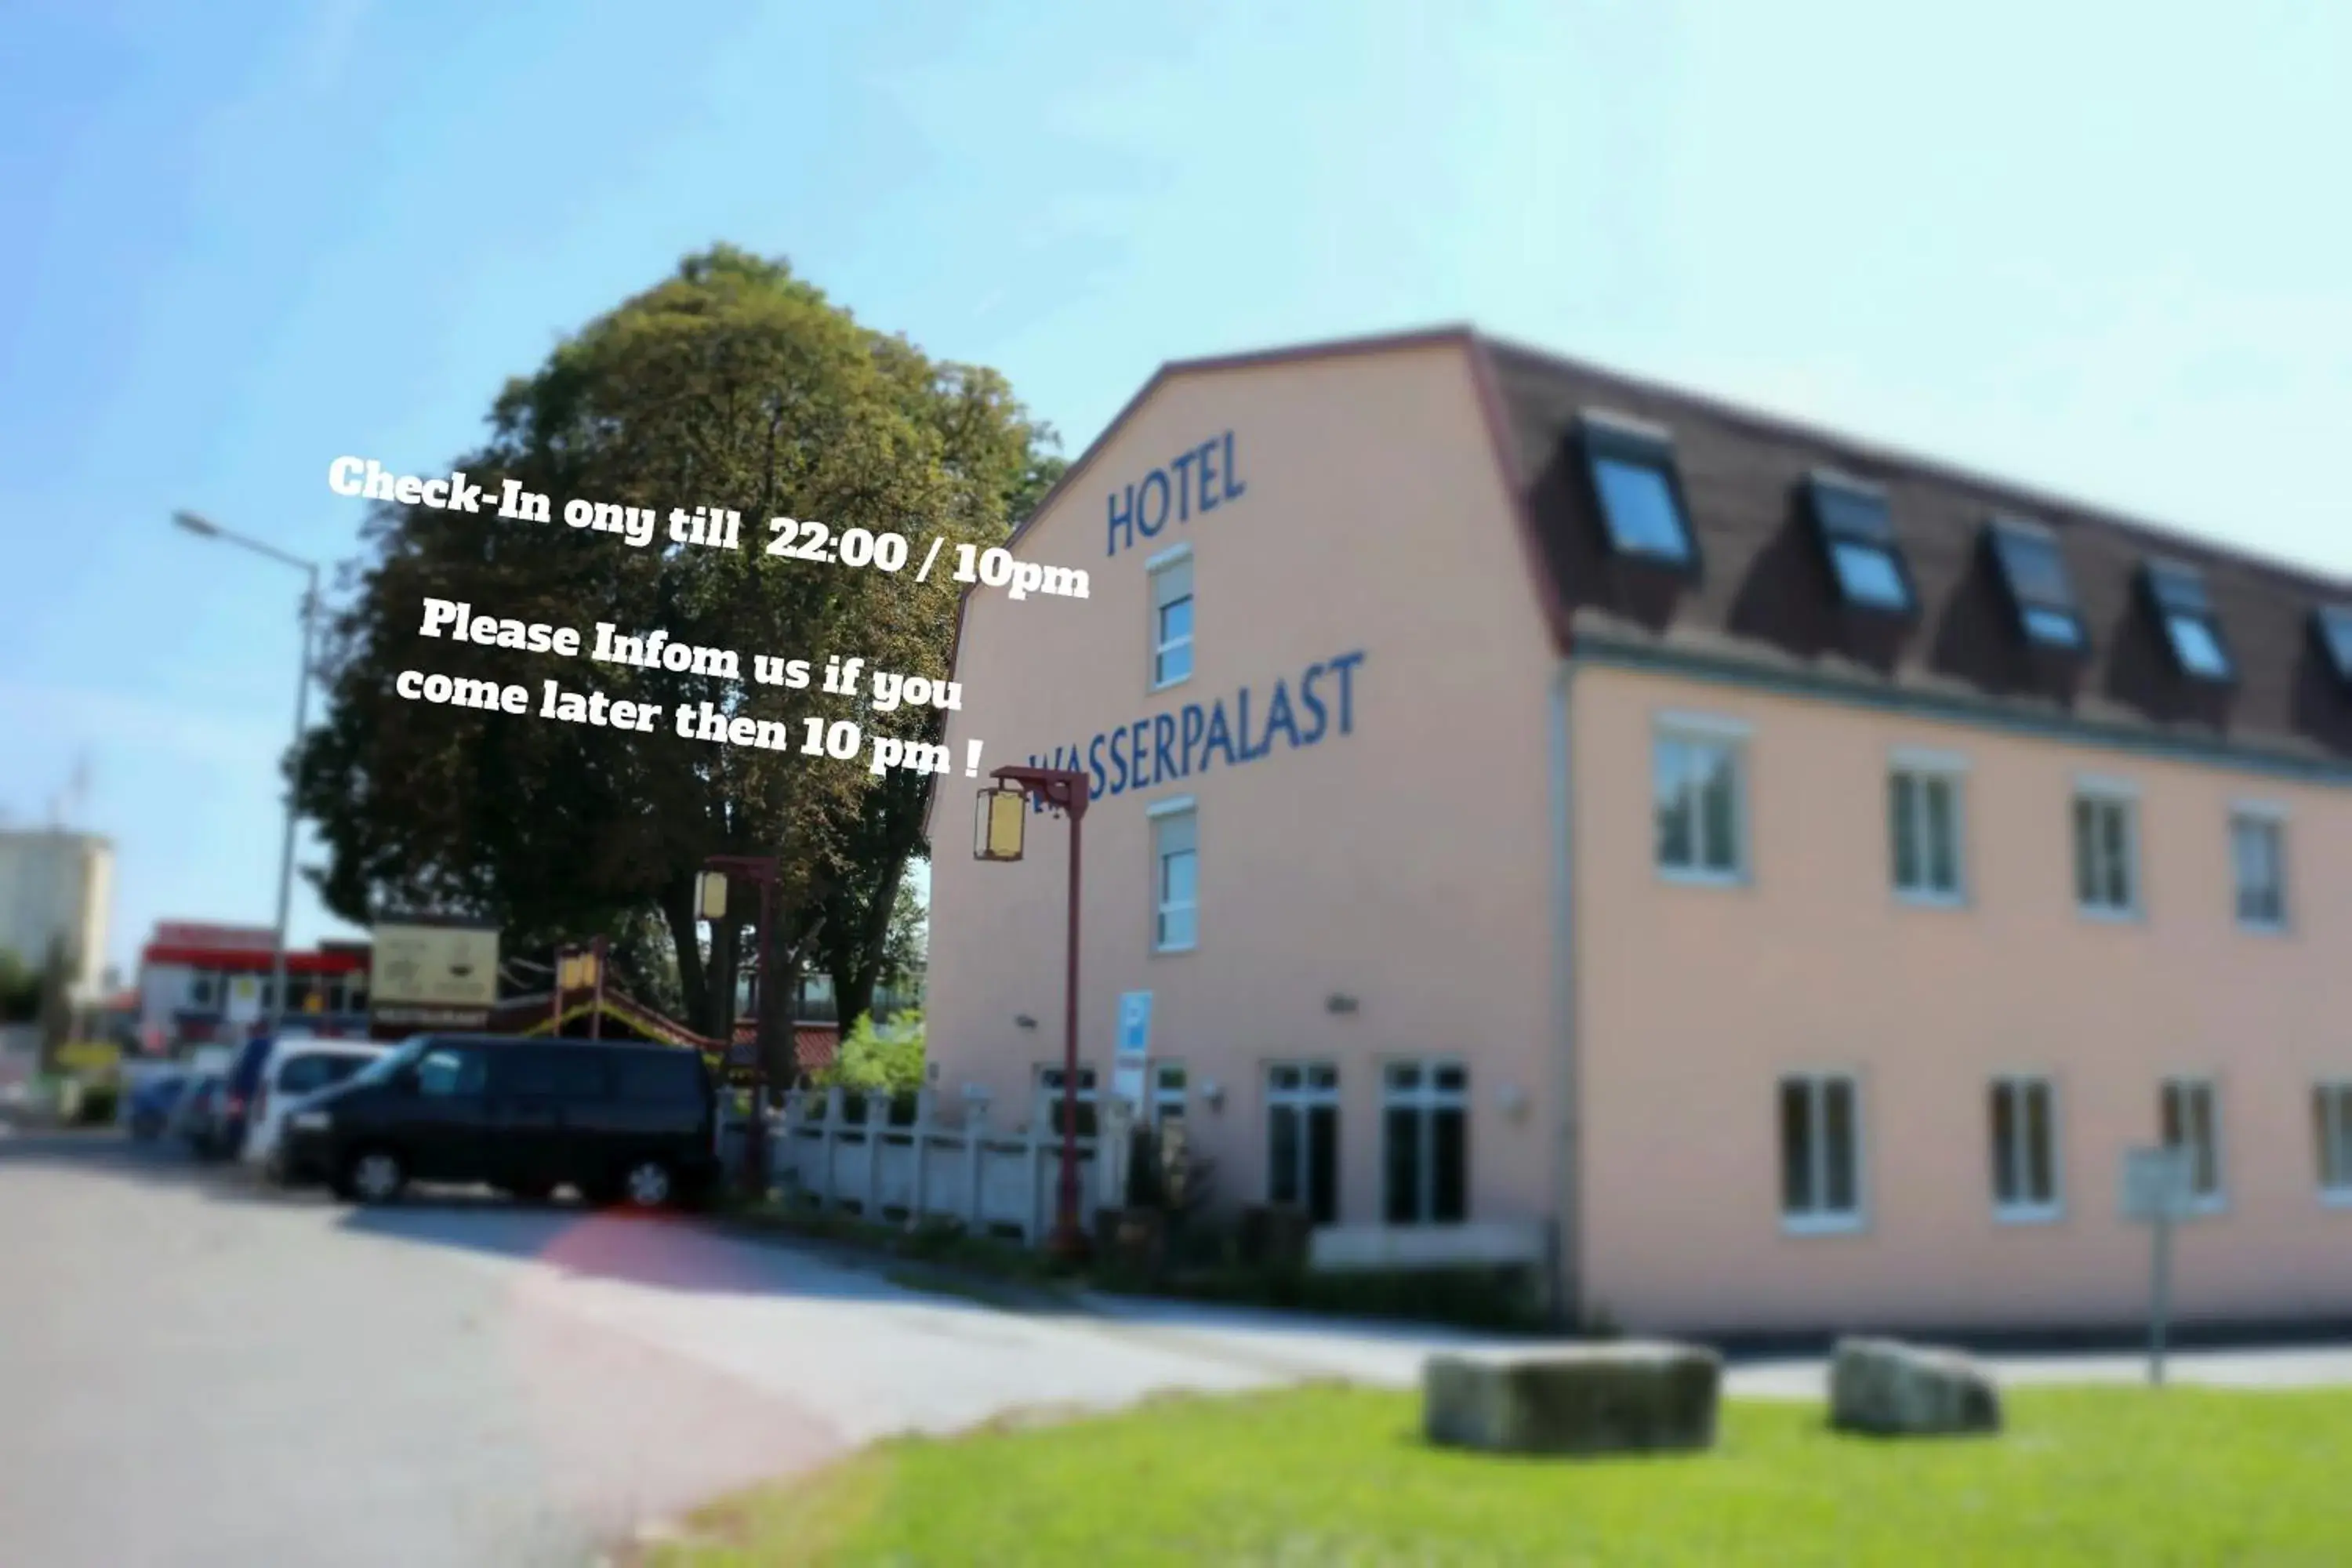 Property building in Hotel Wasserpalast